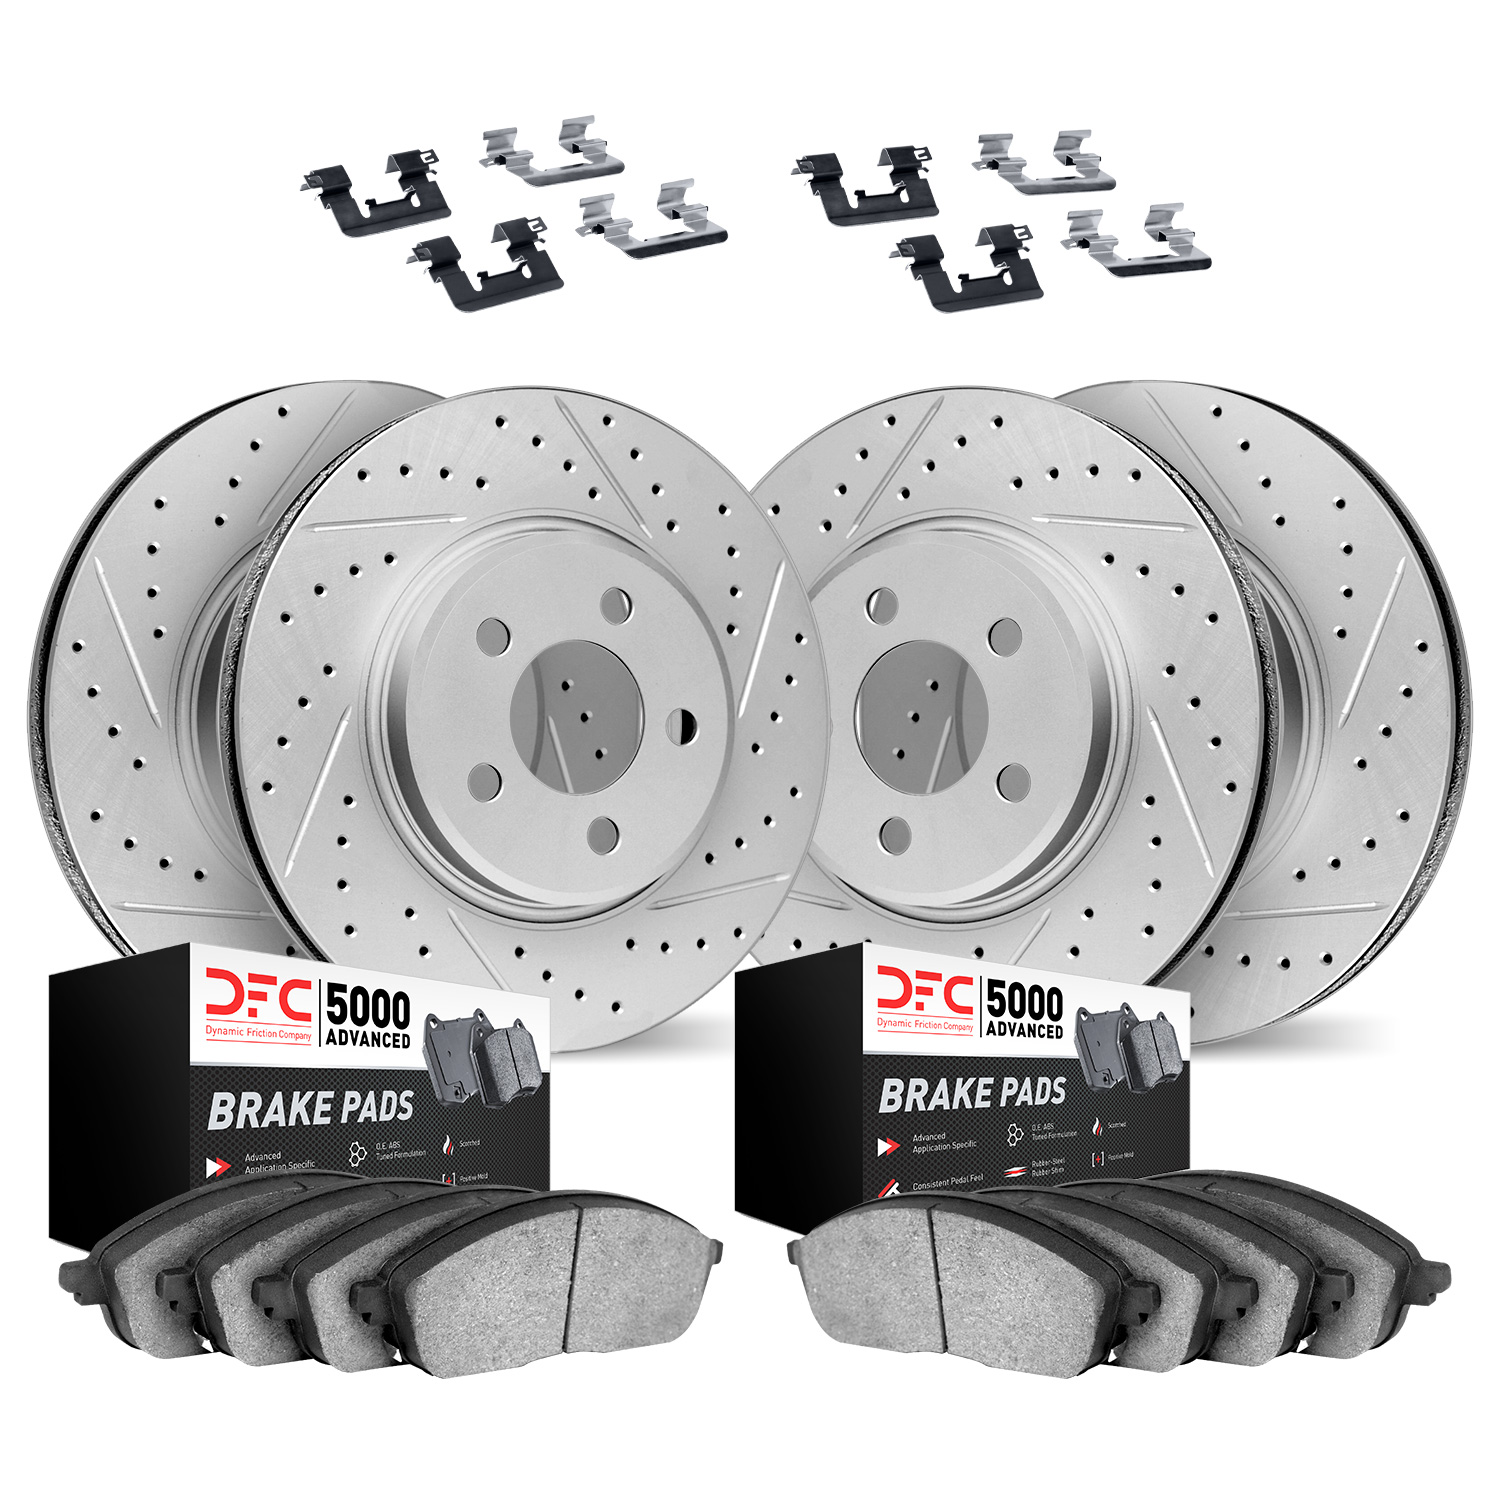 2514-31016 Geoperformance Drilled/Slotted Rotors w/5000 Advanced Brake Pads Kit & Hardware, 2008-2013 BMW, Position: Front and R